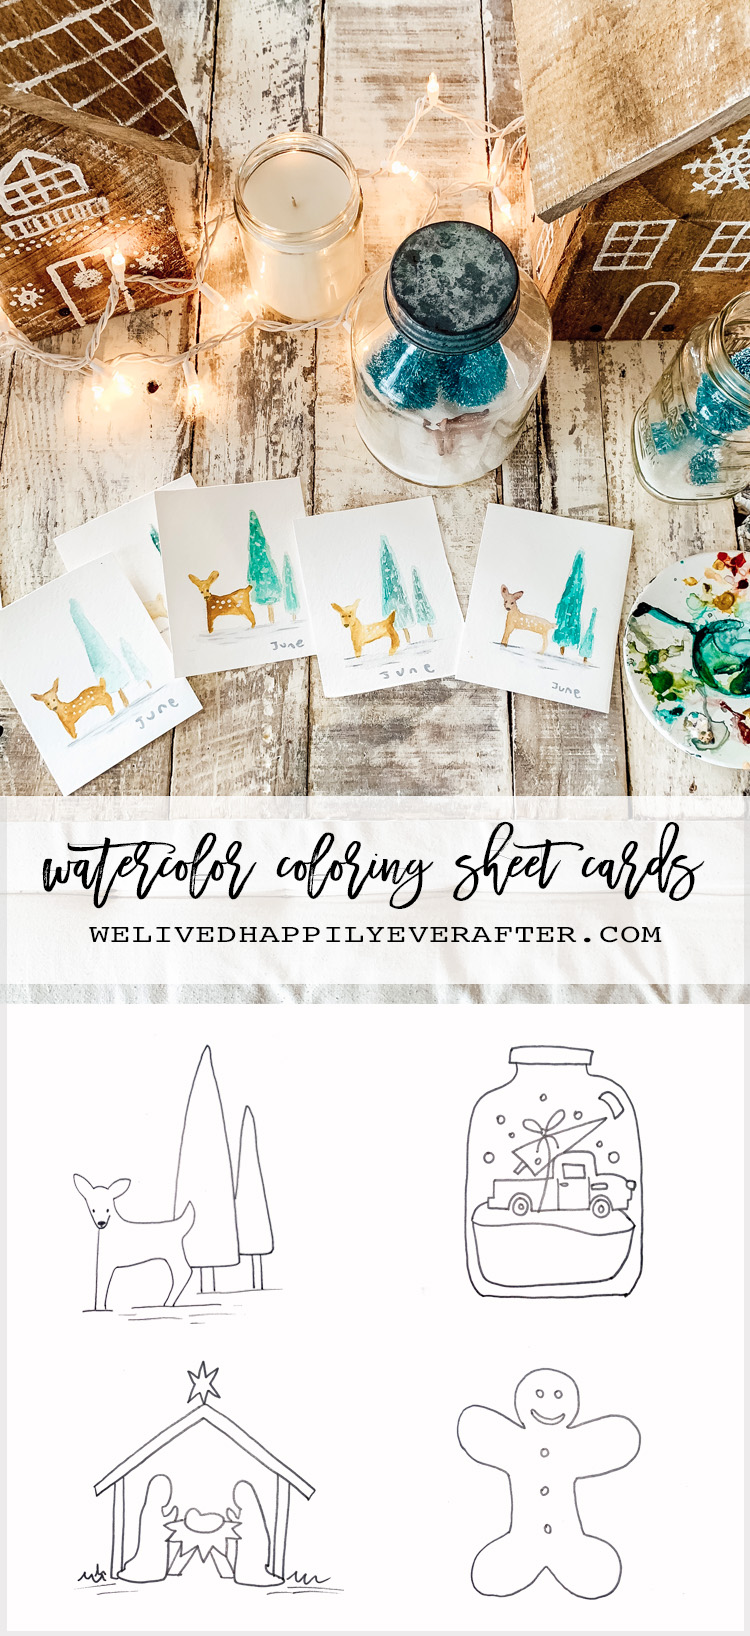 Printable Diy Christmas Card Coloring Sheet For Kids To Paint We Lived Happily Ever After